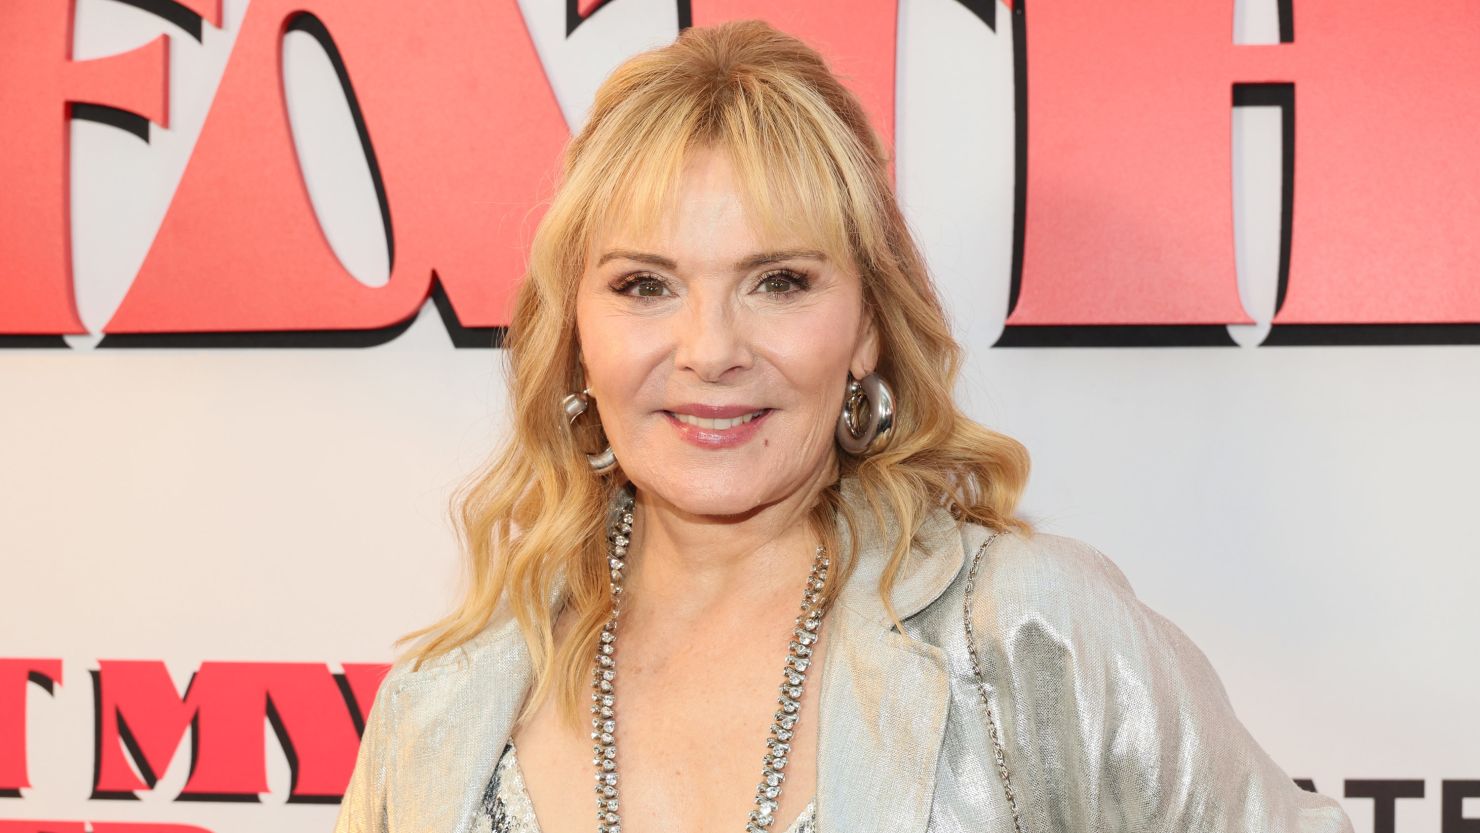 Kim Cattrall at the "About My Father" premiere in May in New York City. 